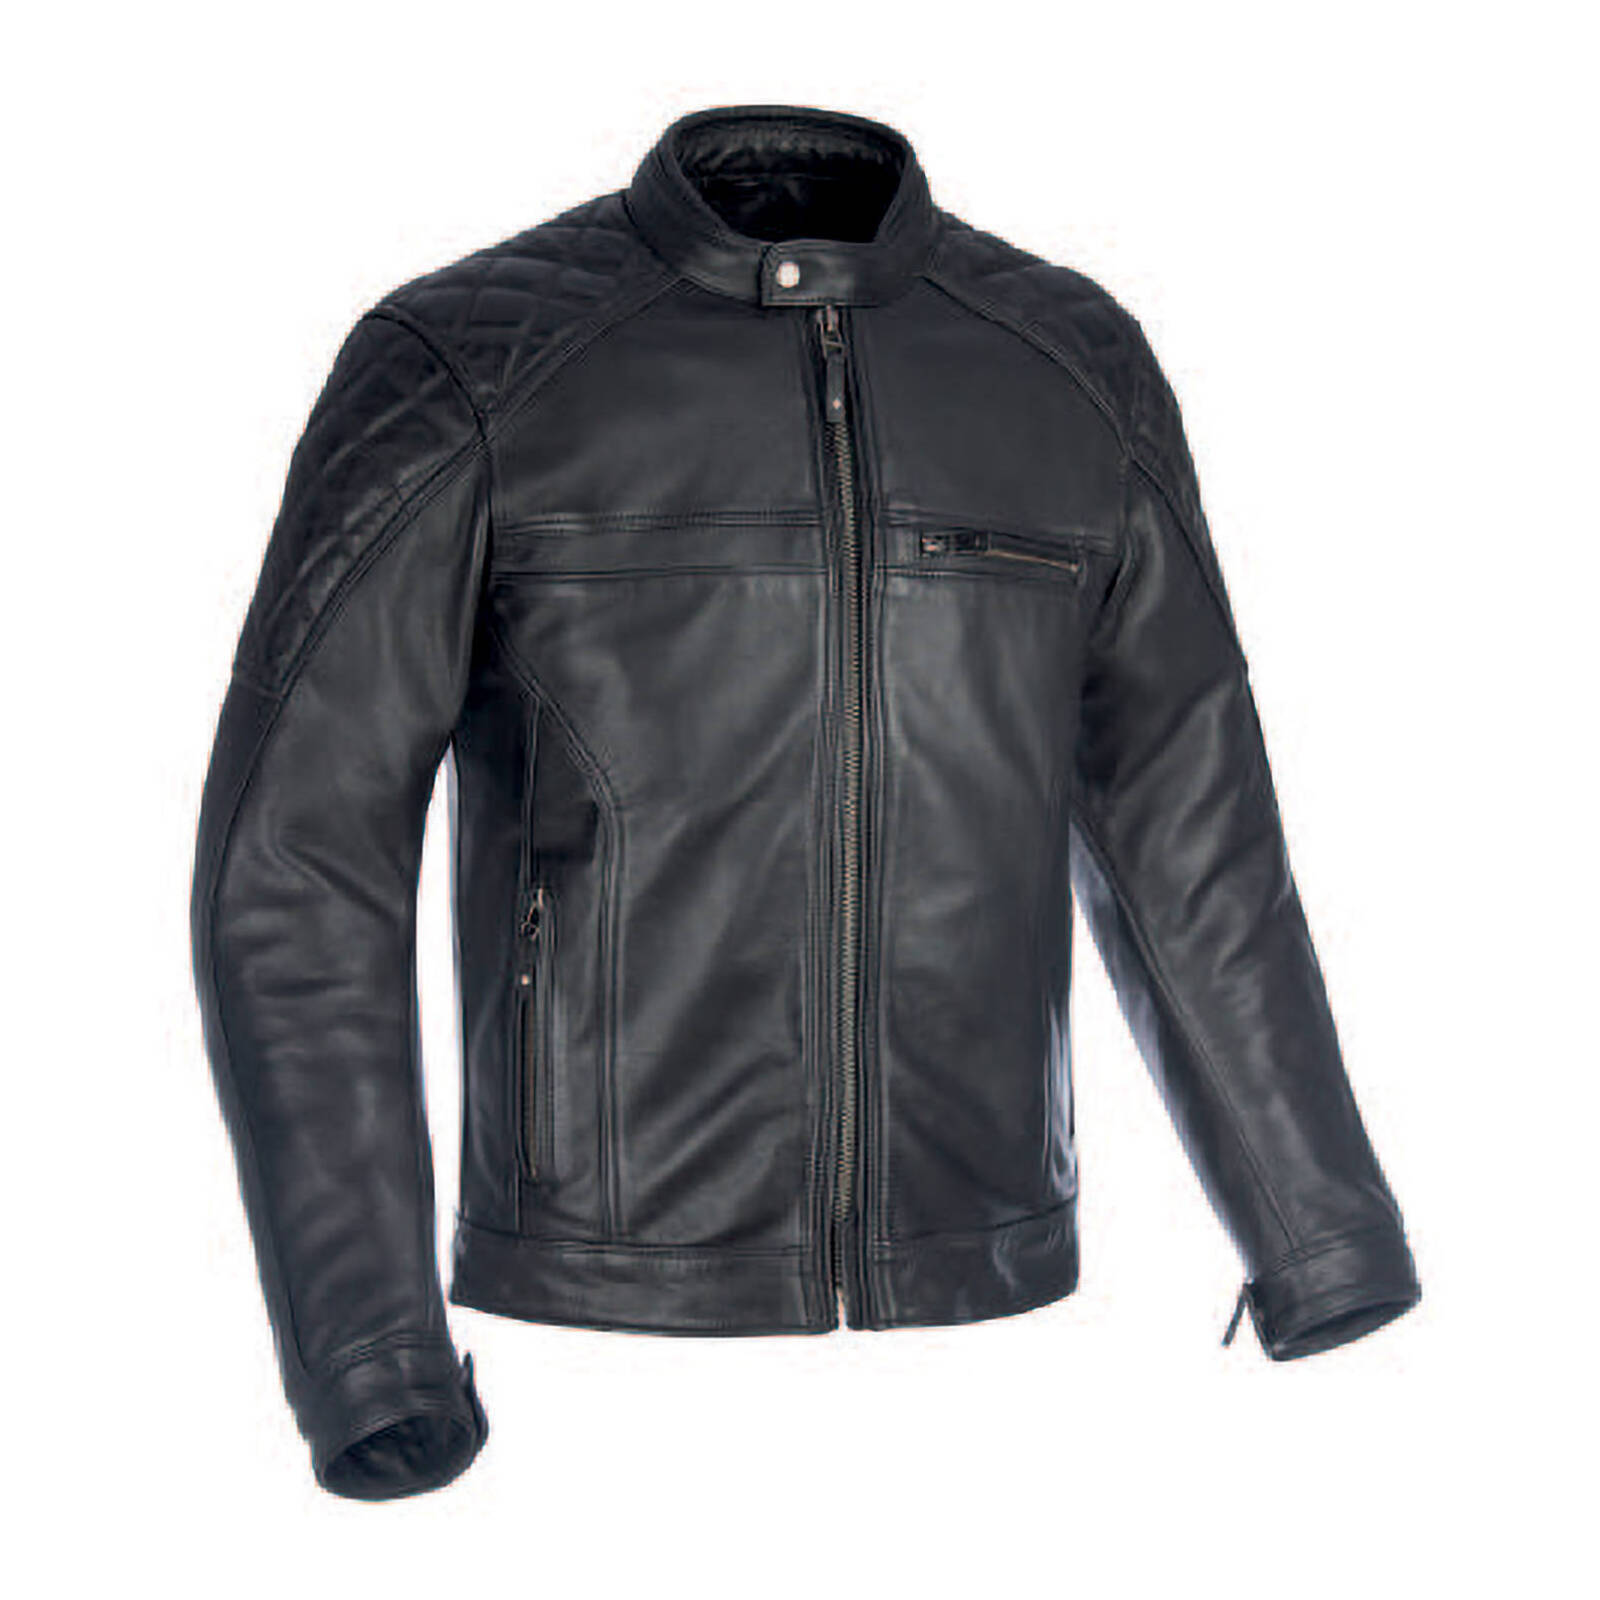 Oxford Route 73 2.0 Leather Jacket - Black (2XL)